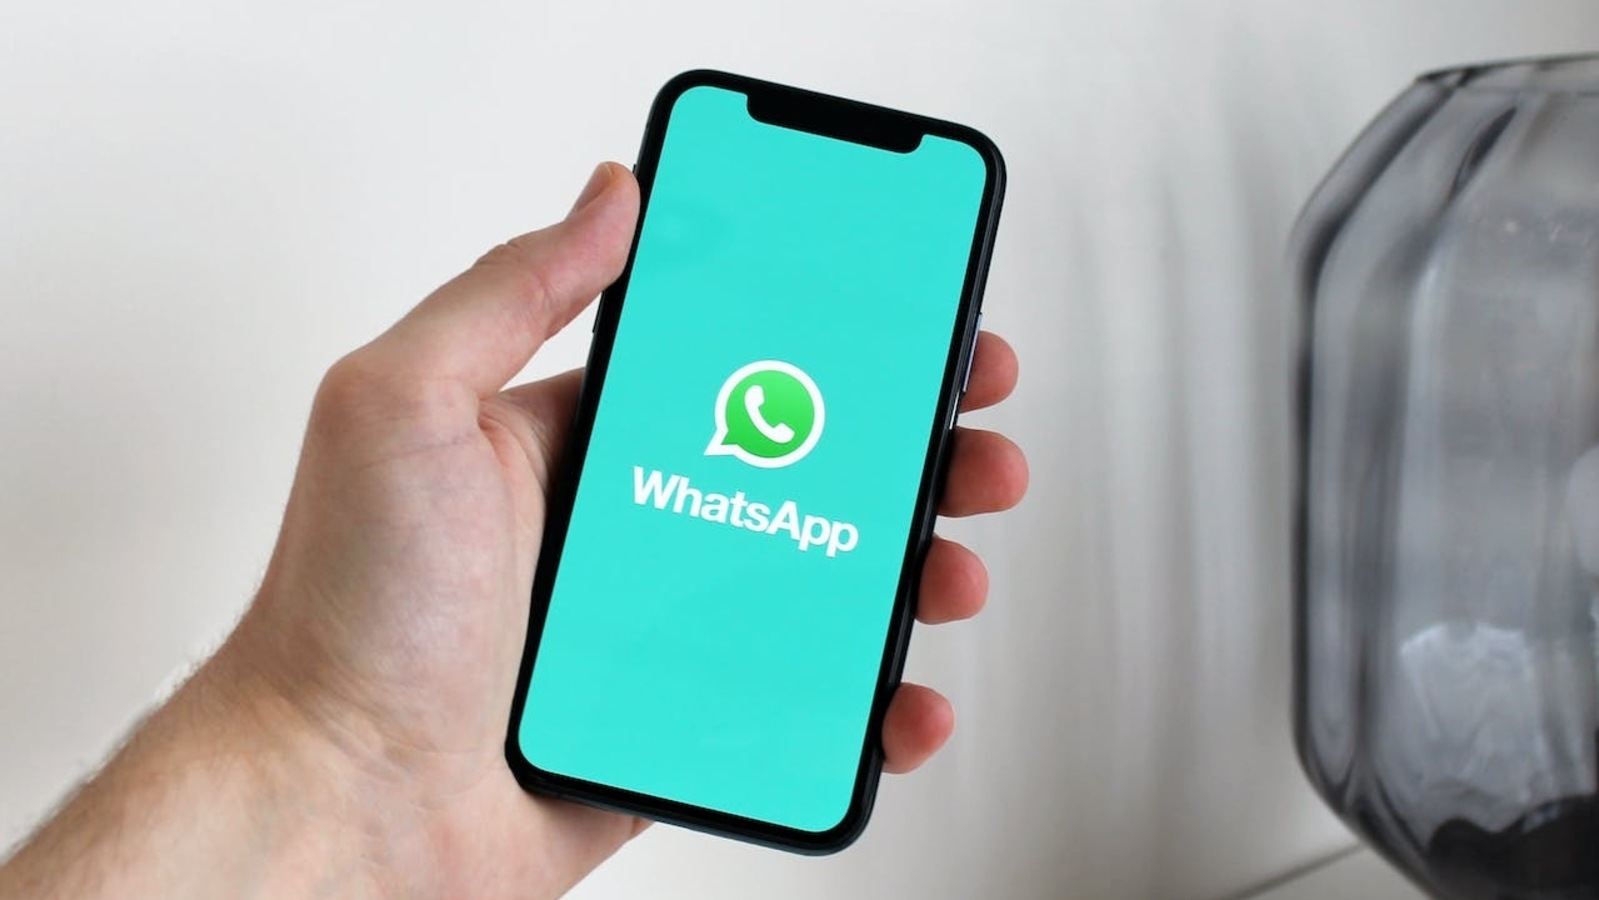 WhatsApp head announces possibility of ads in Status, Channels